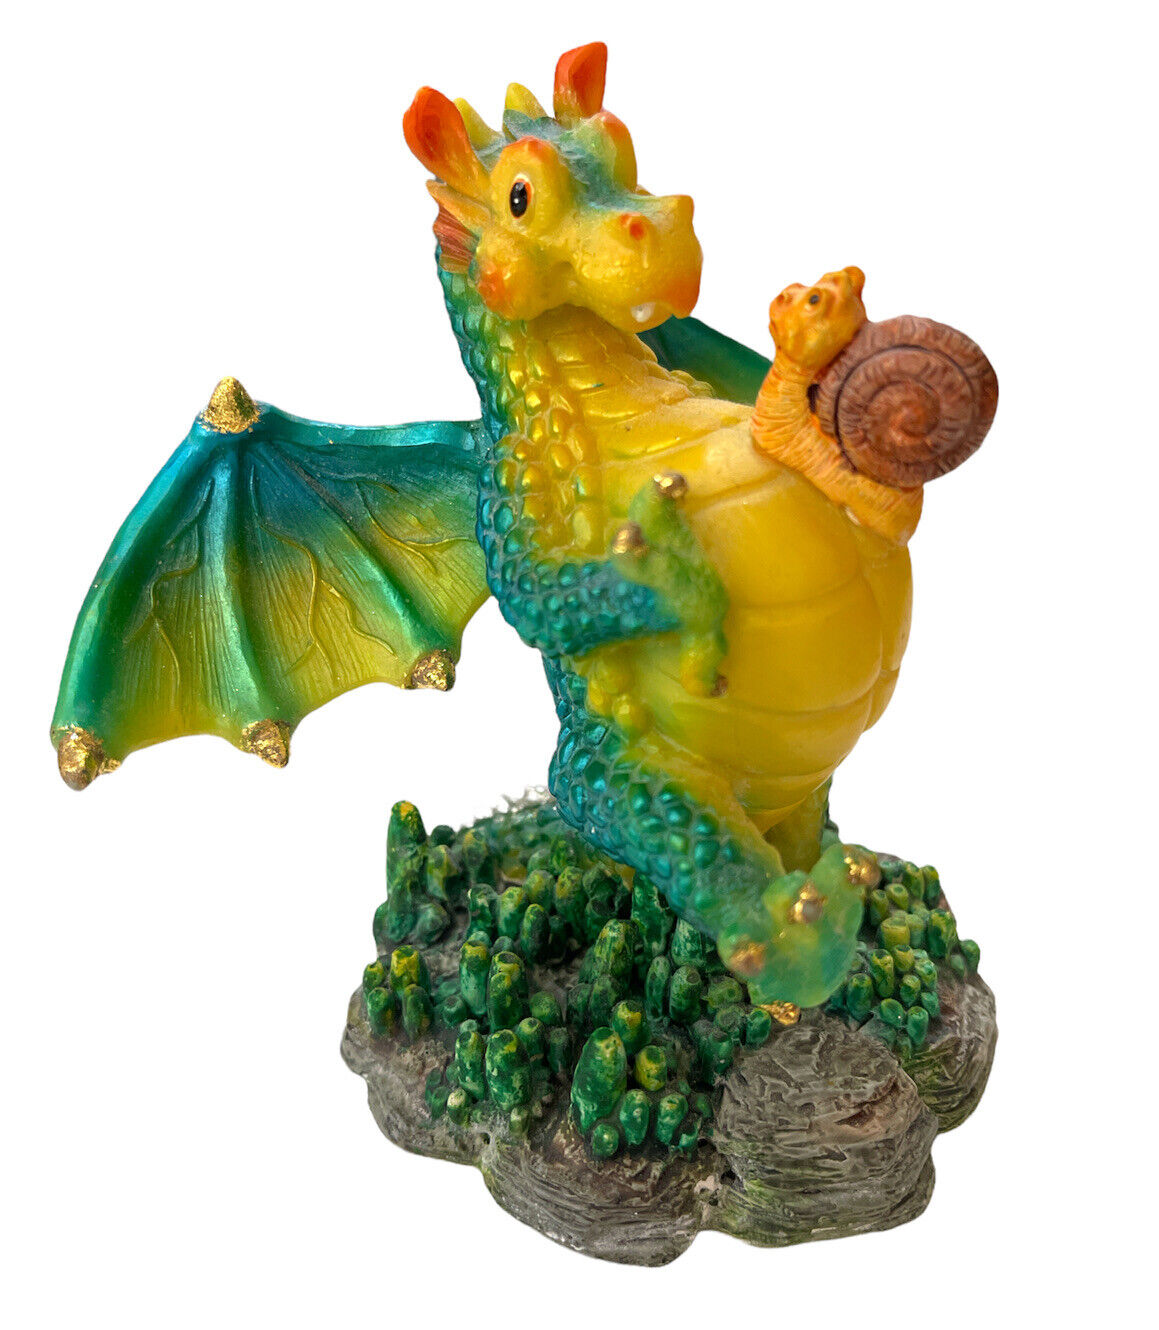 Vintage Fantasy Dragon Figurine Statue by Long Arch 2003 The Way Up